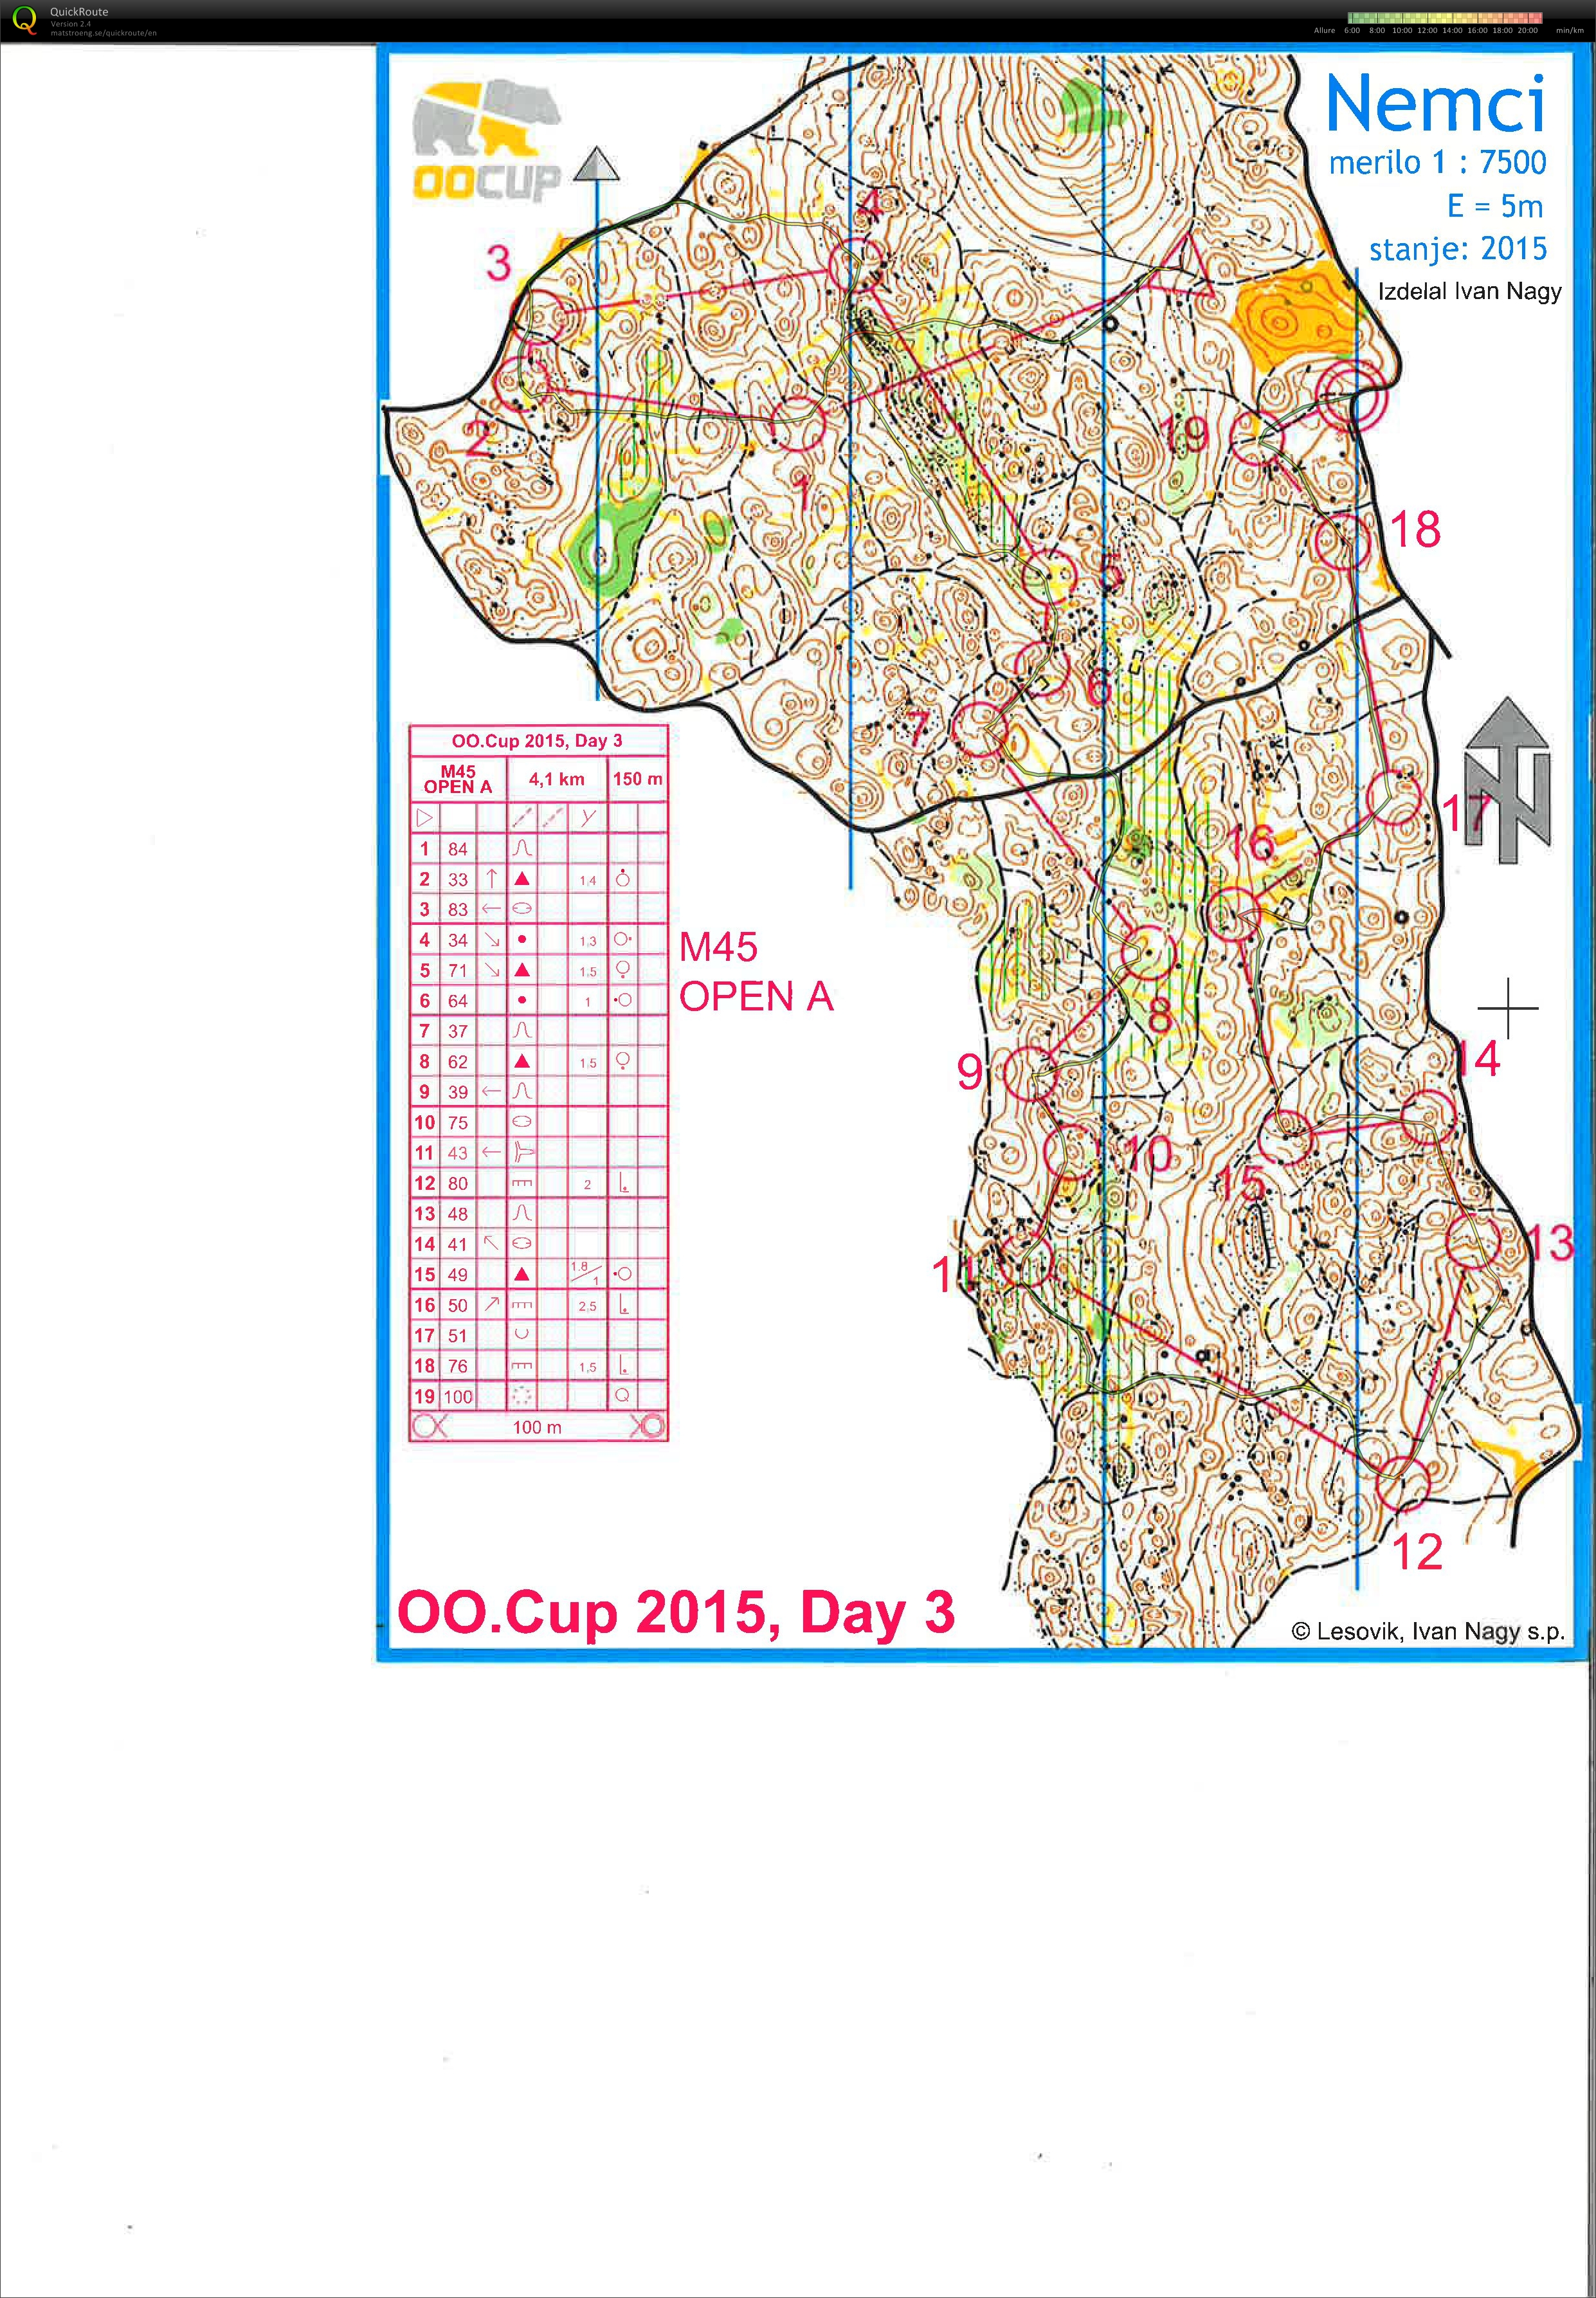 OOCup-Day3 (27-07-2015)